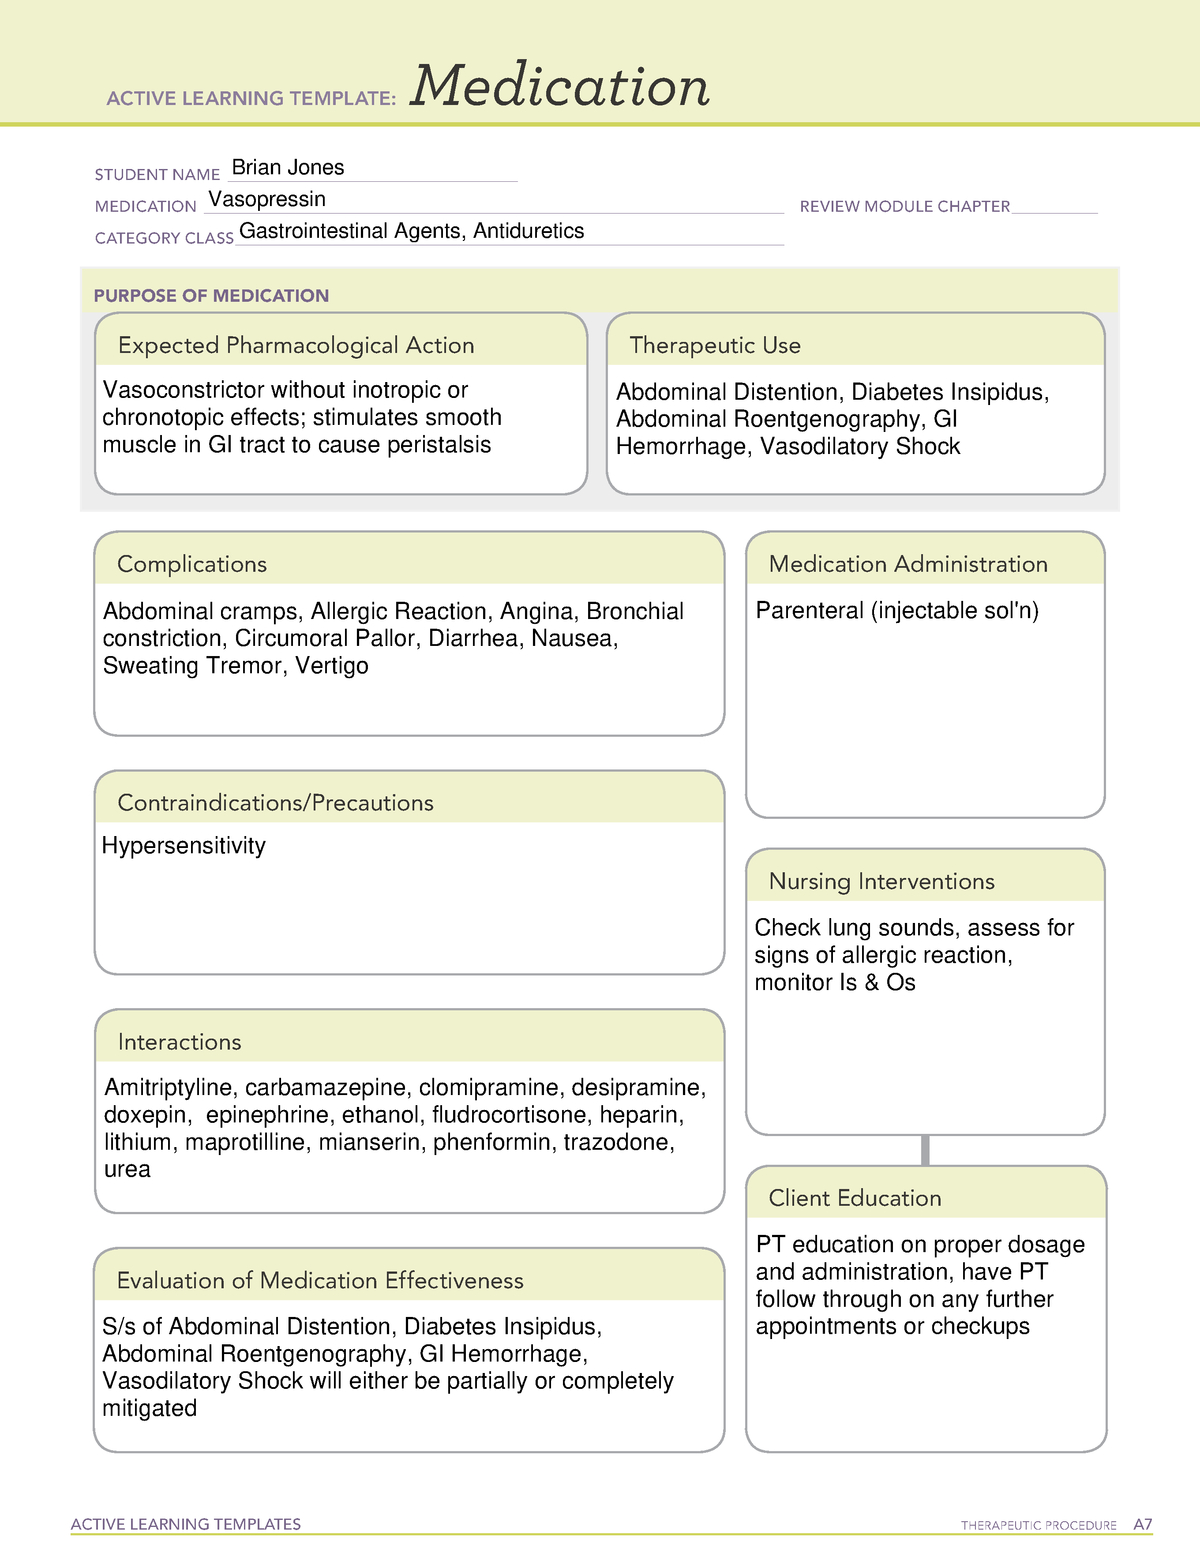 tcas-medication-ati-template-mental-health-active-learning-templates-therapeutic-procedure-a